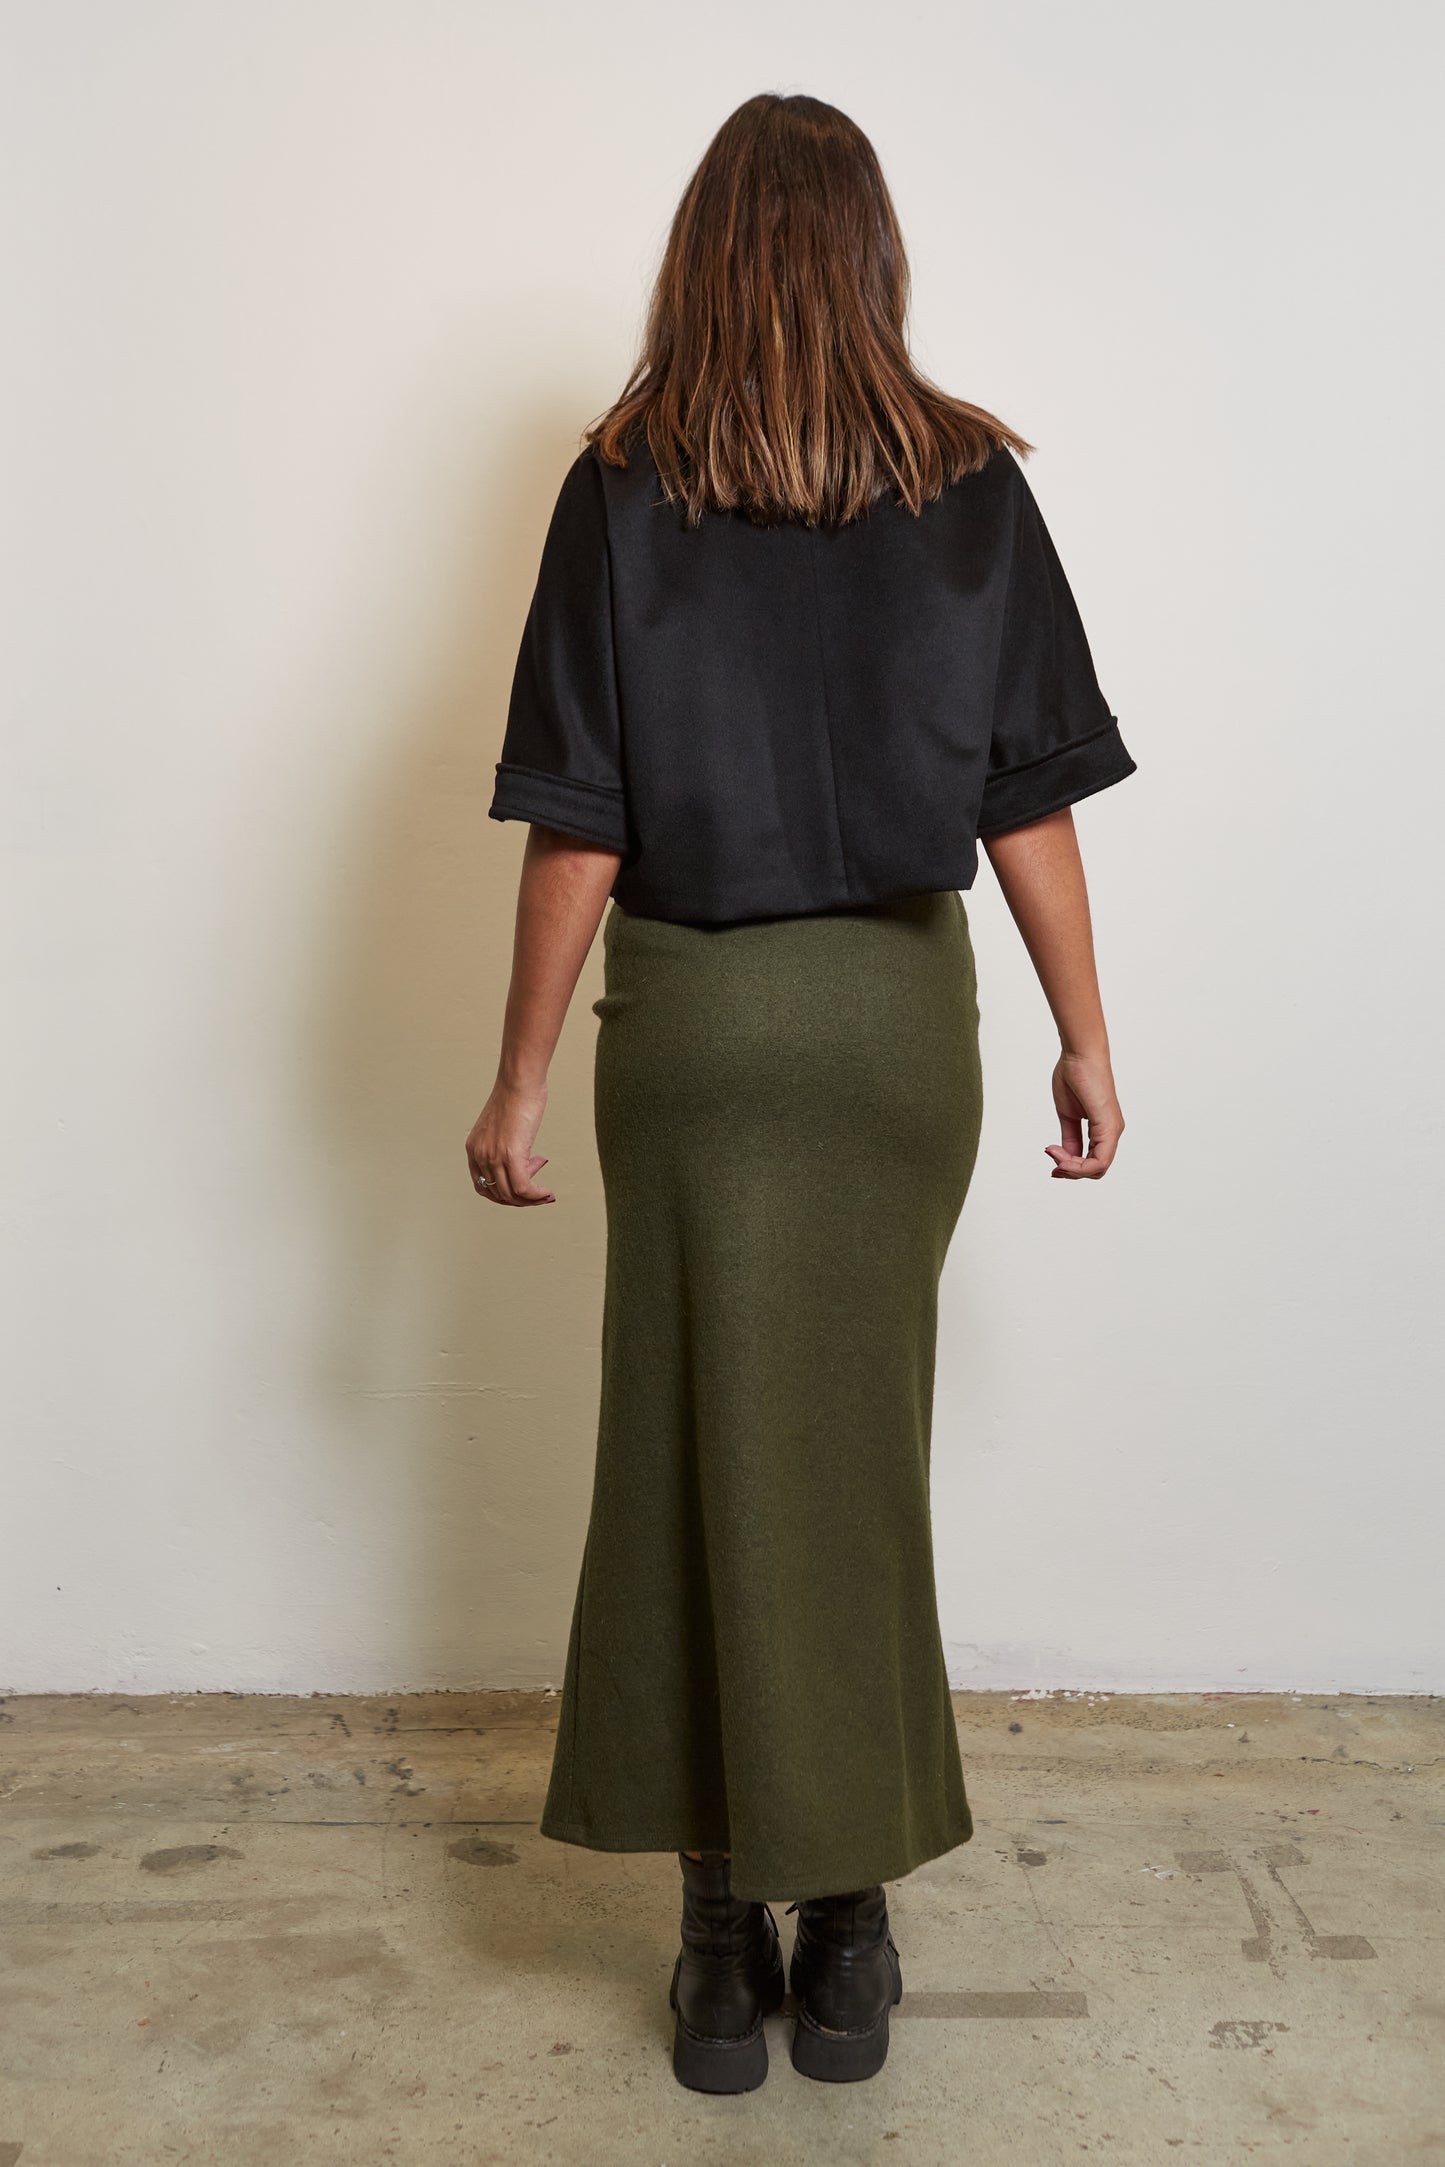 Alice Rusched Skirt